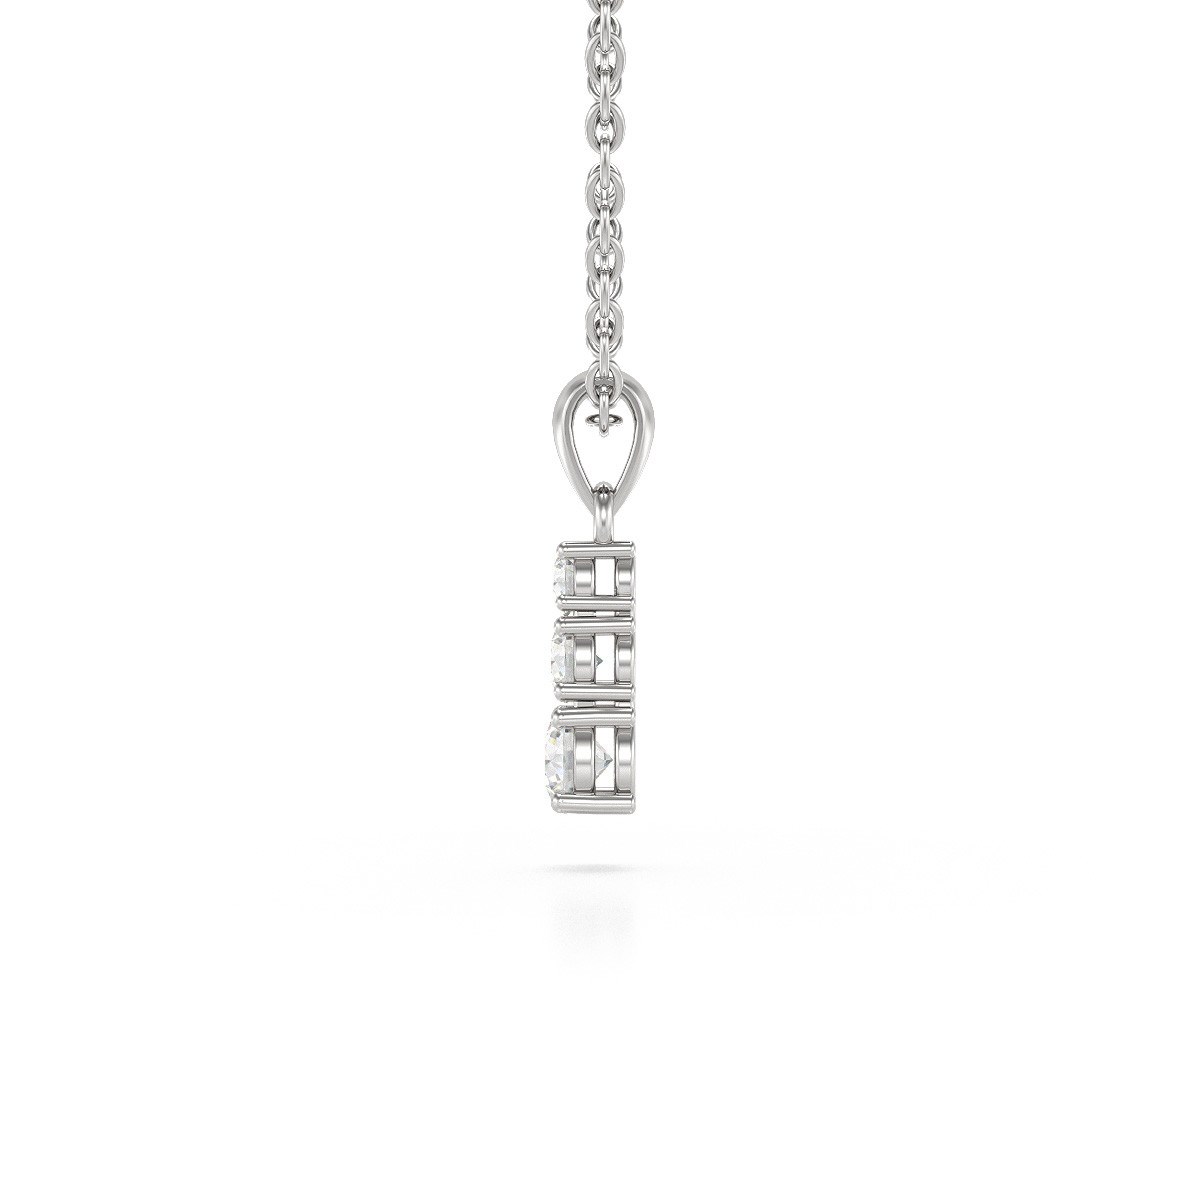 Collier Pendentif ADEN Or 585 Blanc Diamant Chaine Or 585 incluse 0.45grs - vue 4